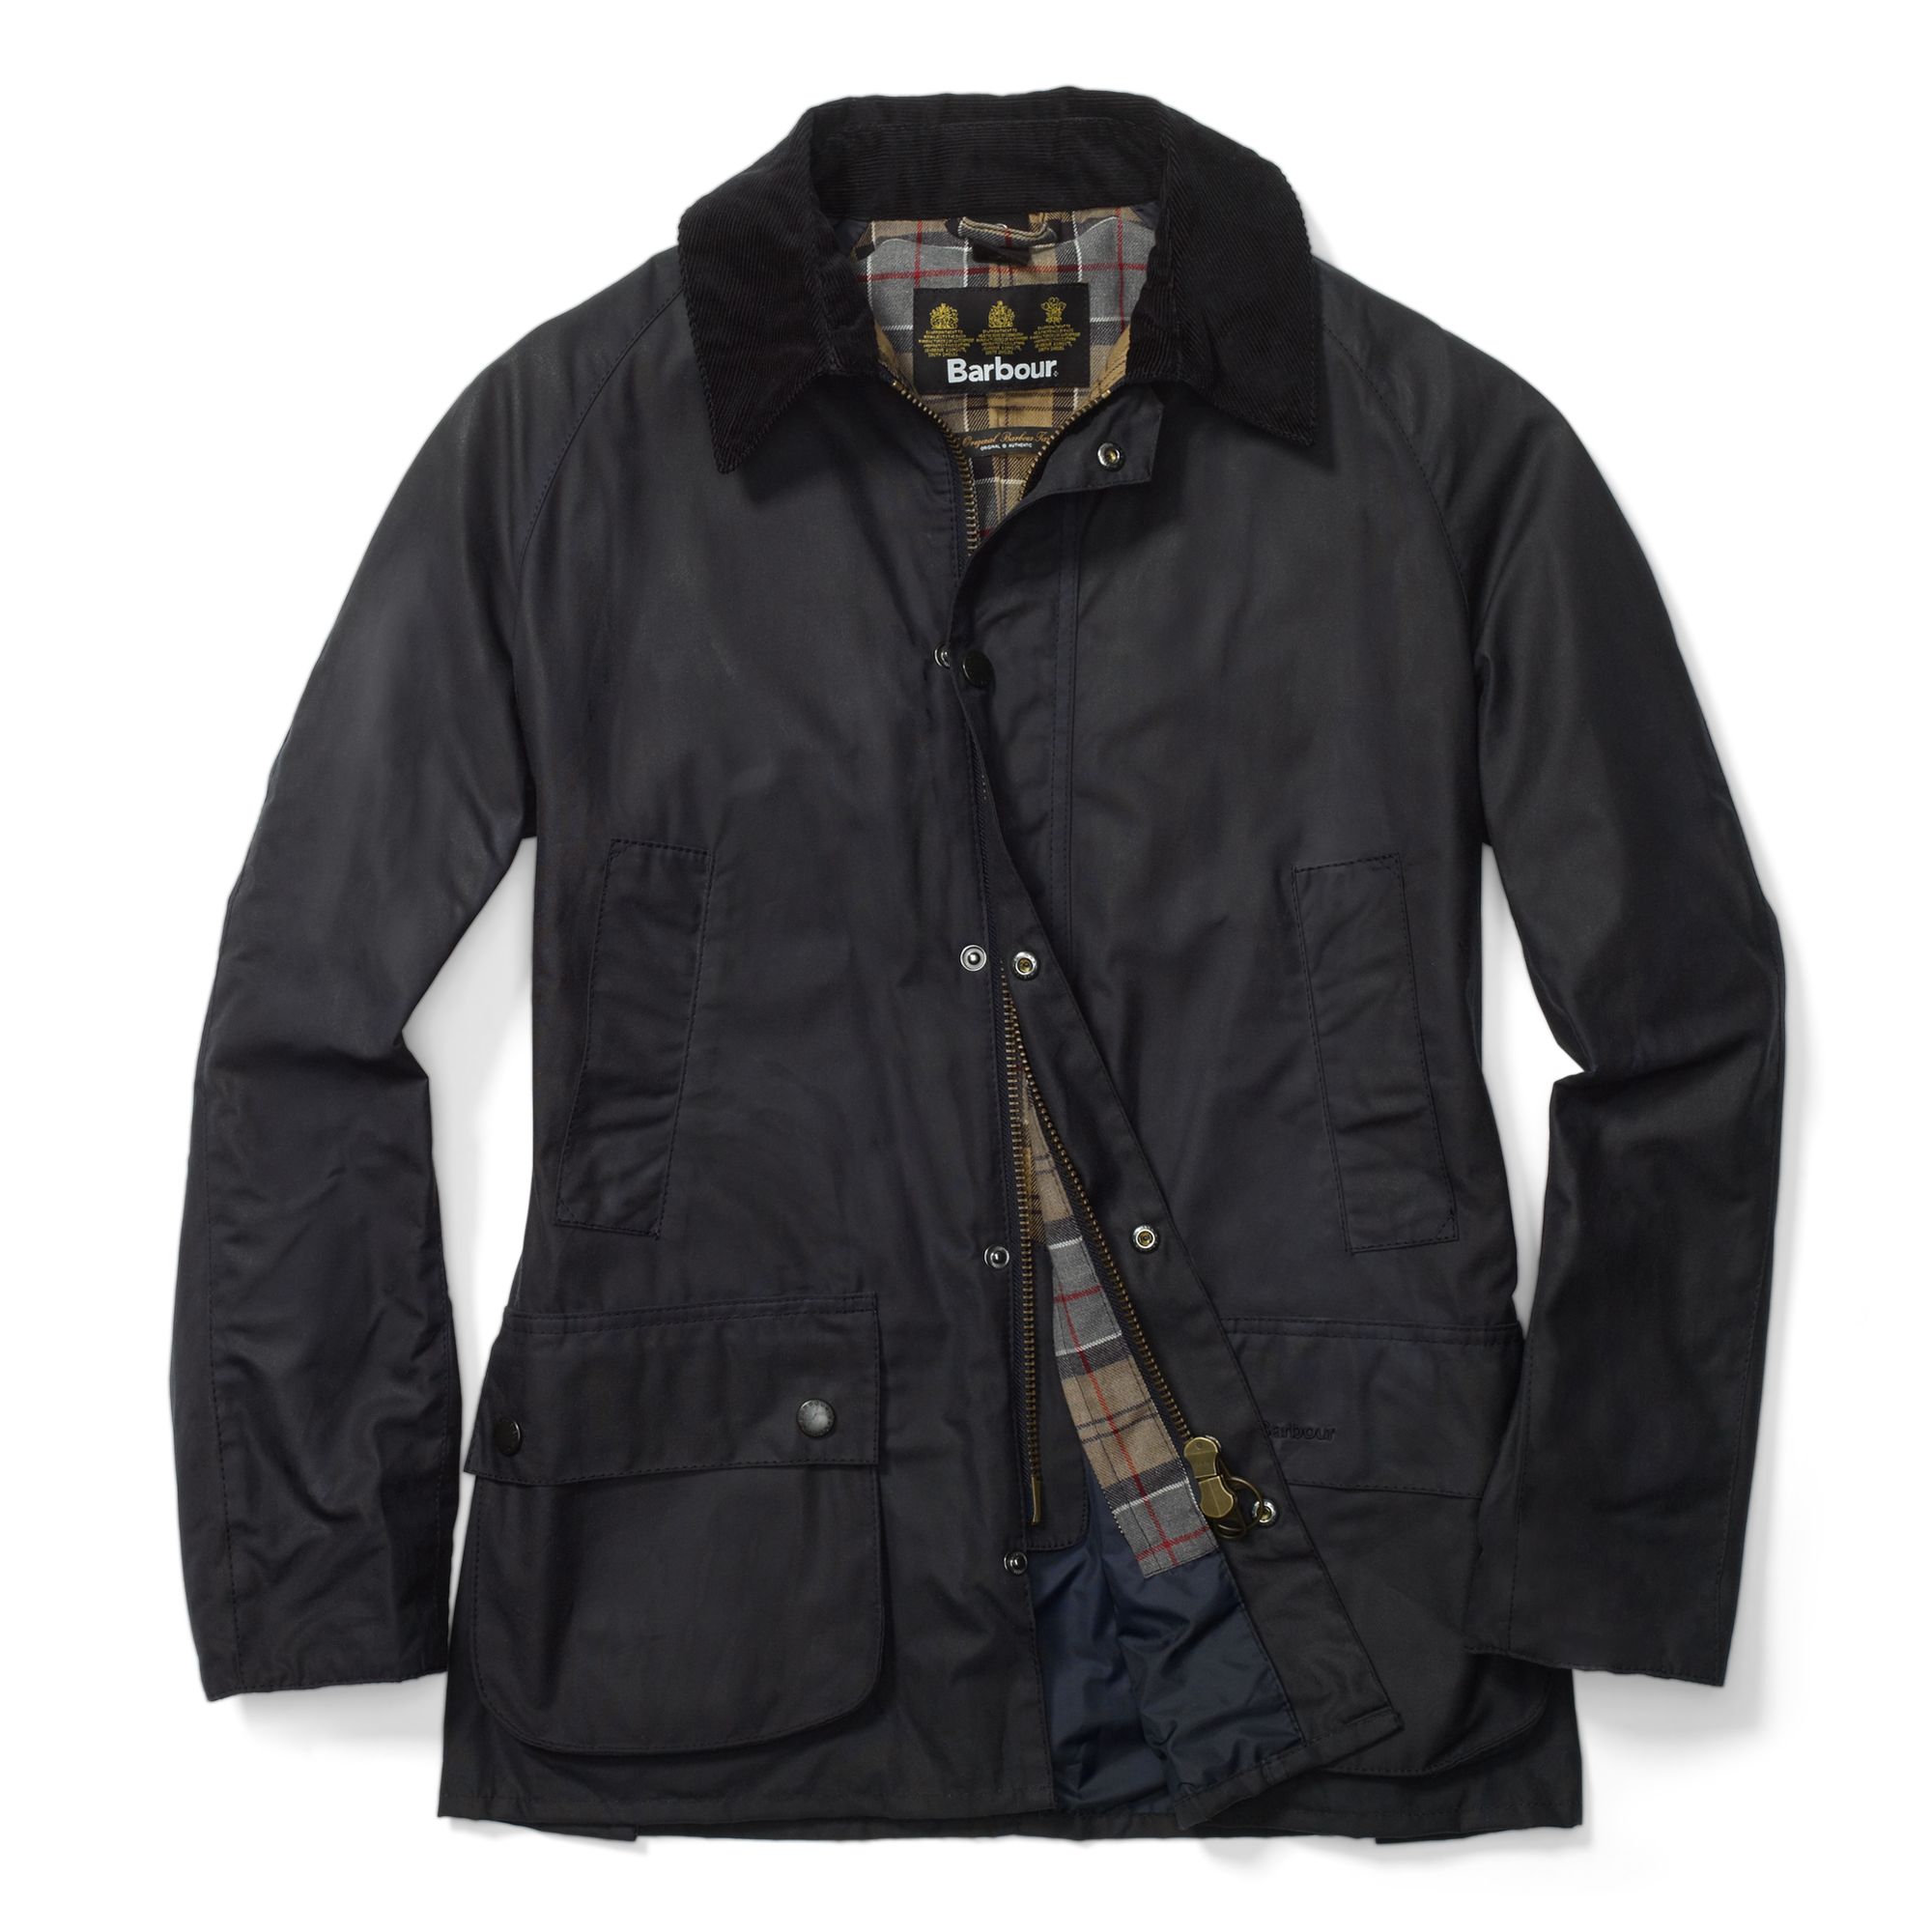 Lyst - Club Monaco Barbour Ashby Jacket in Blue for Men